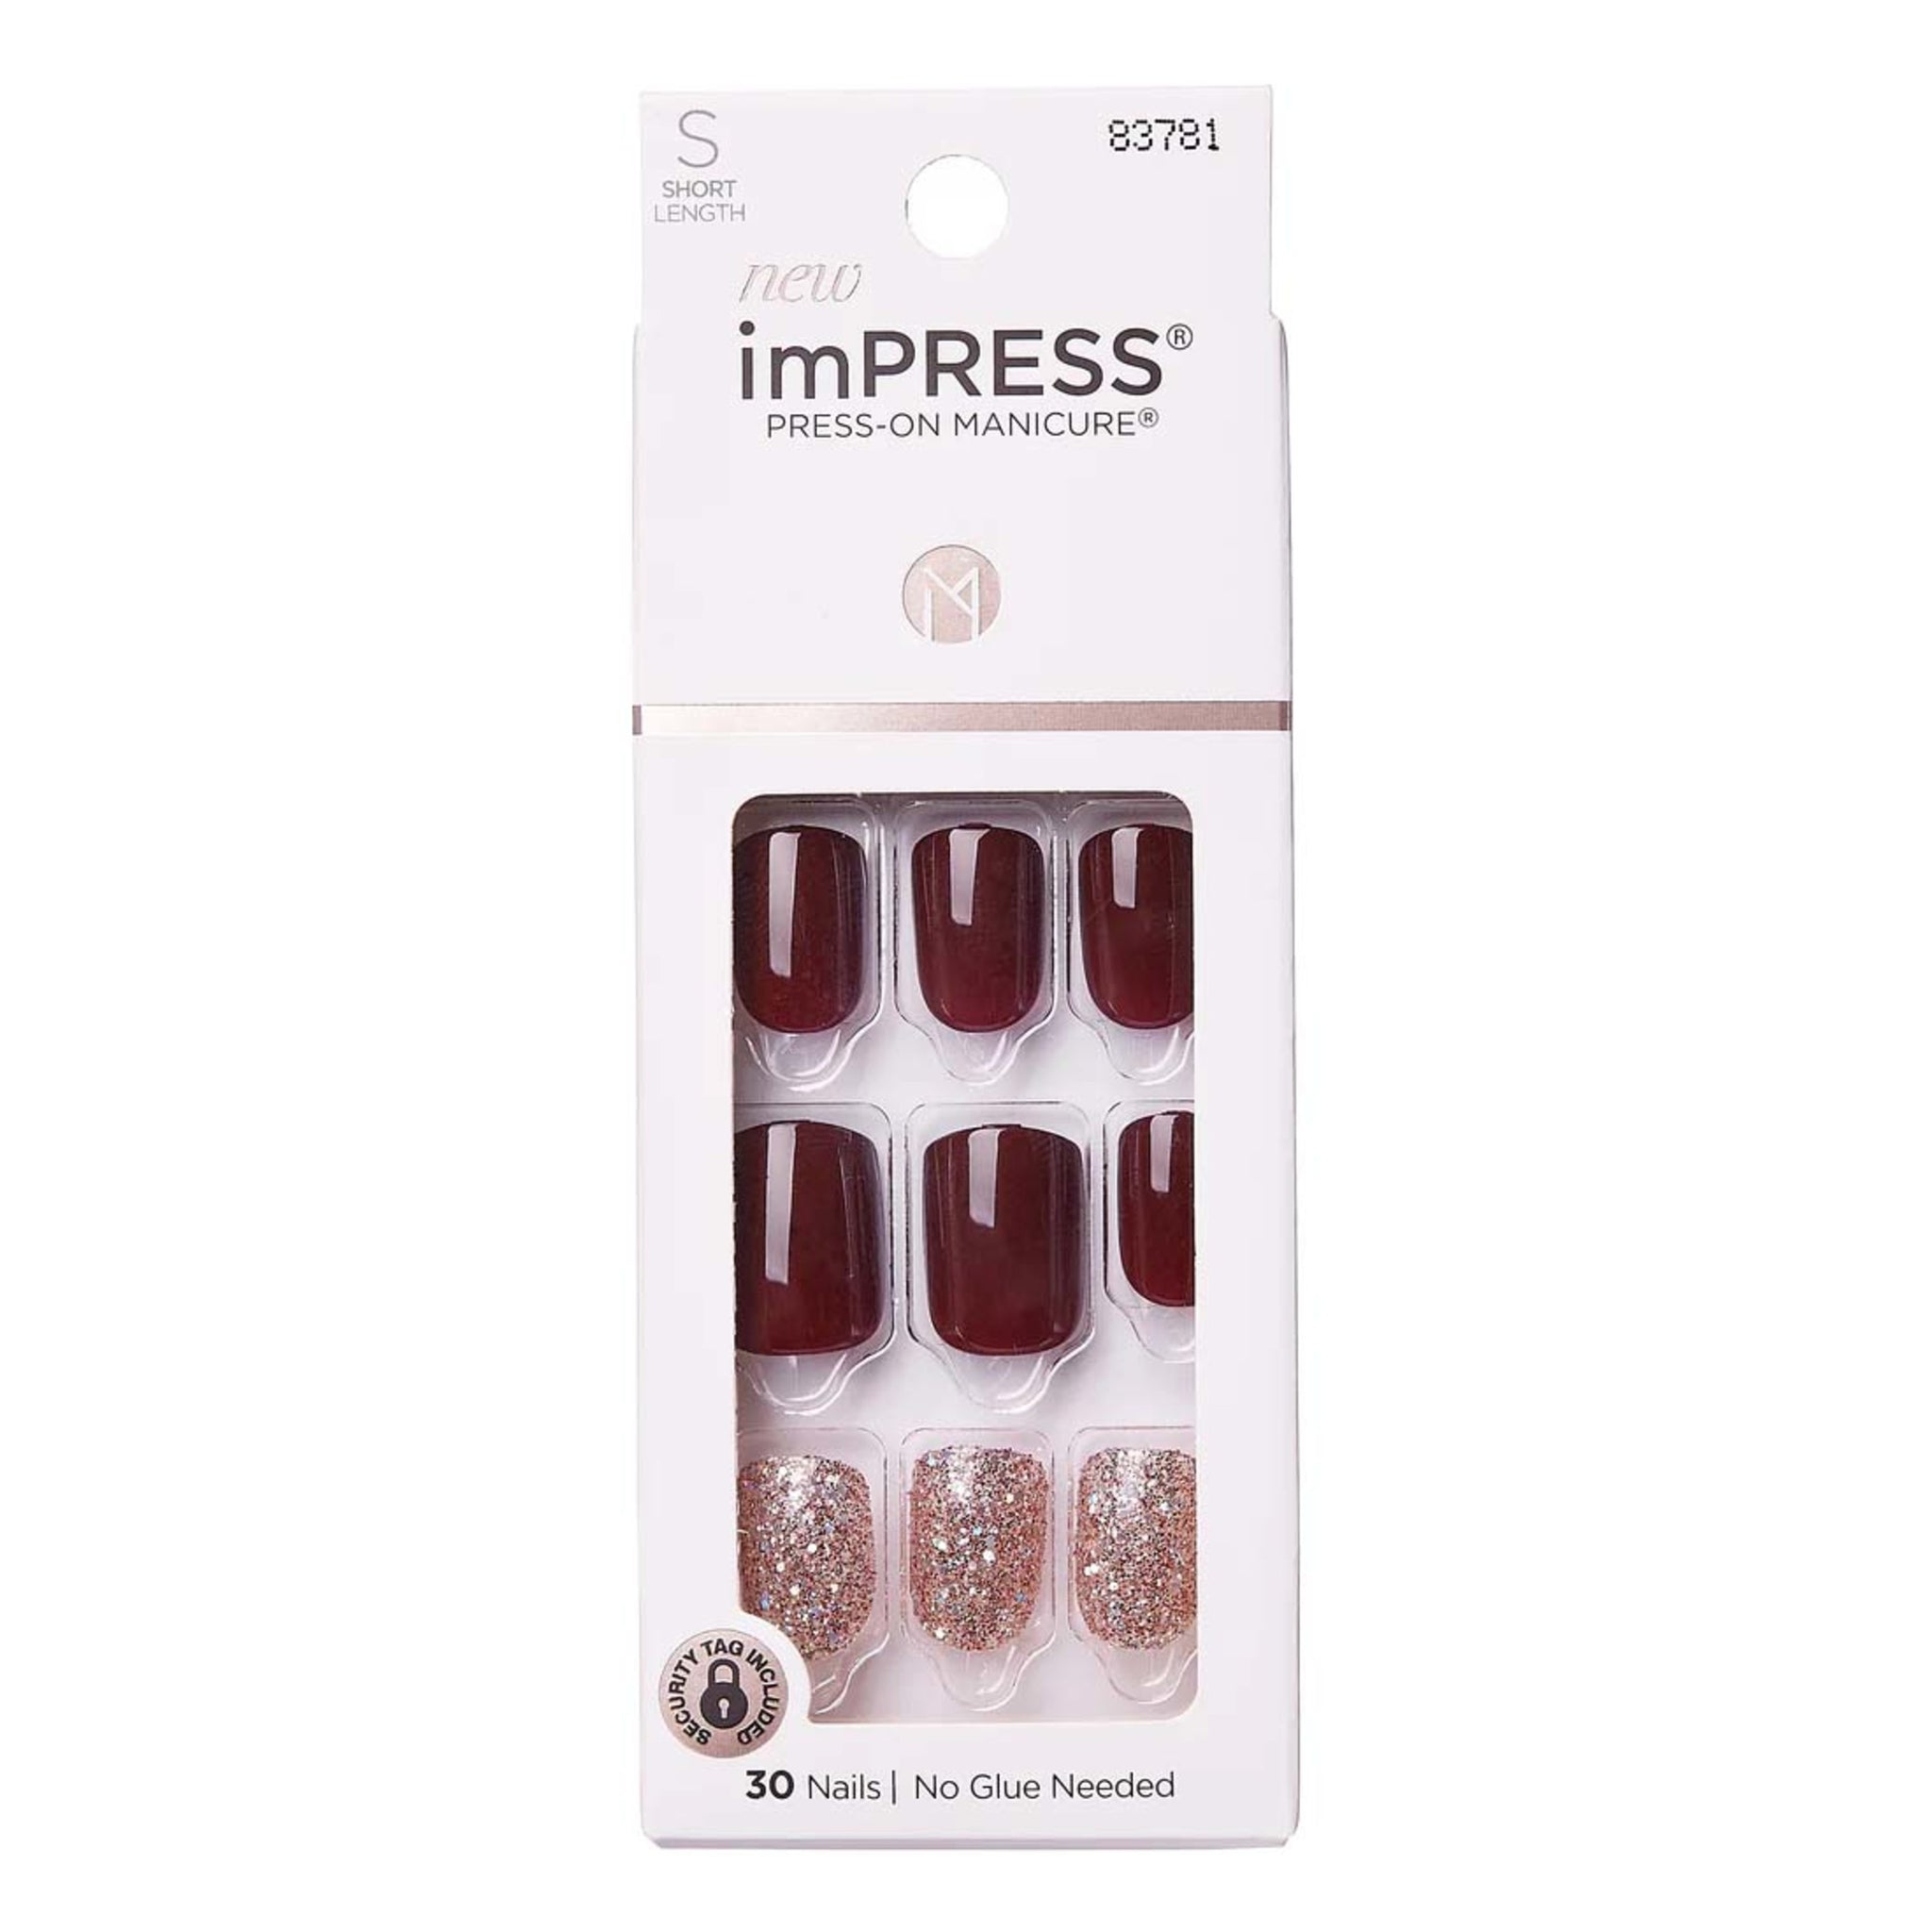 Press-on Manicure Artificial Nails Short Length - No Other